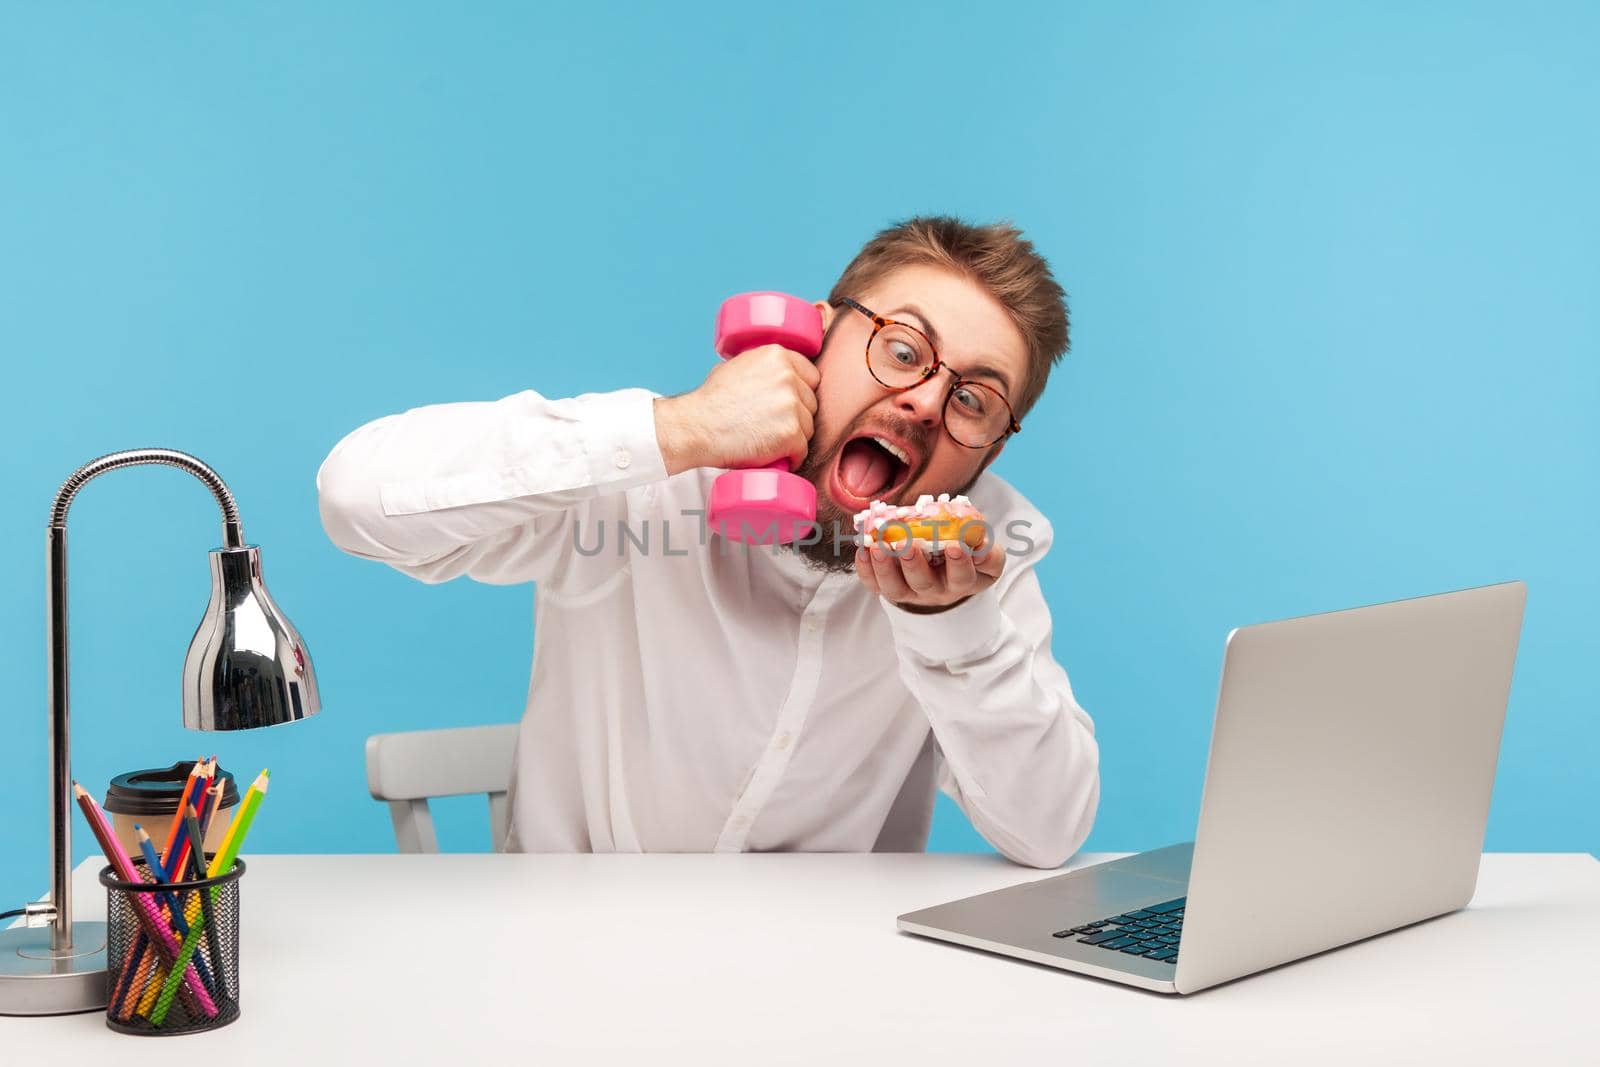 Funny crazy man office worker holding dumbbell but wanting to eat sweet donut ignoring training, temptation, unhealthy eating during work. Indoor studio shot isolated on blue background